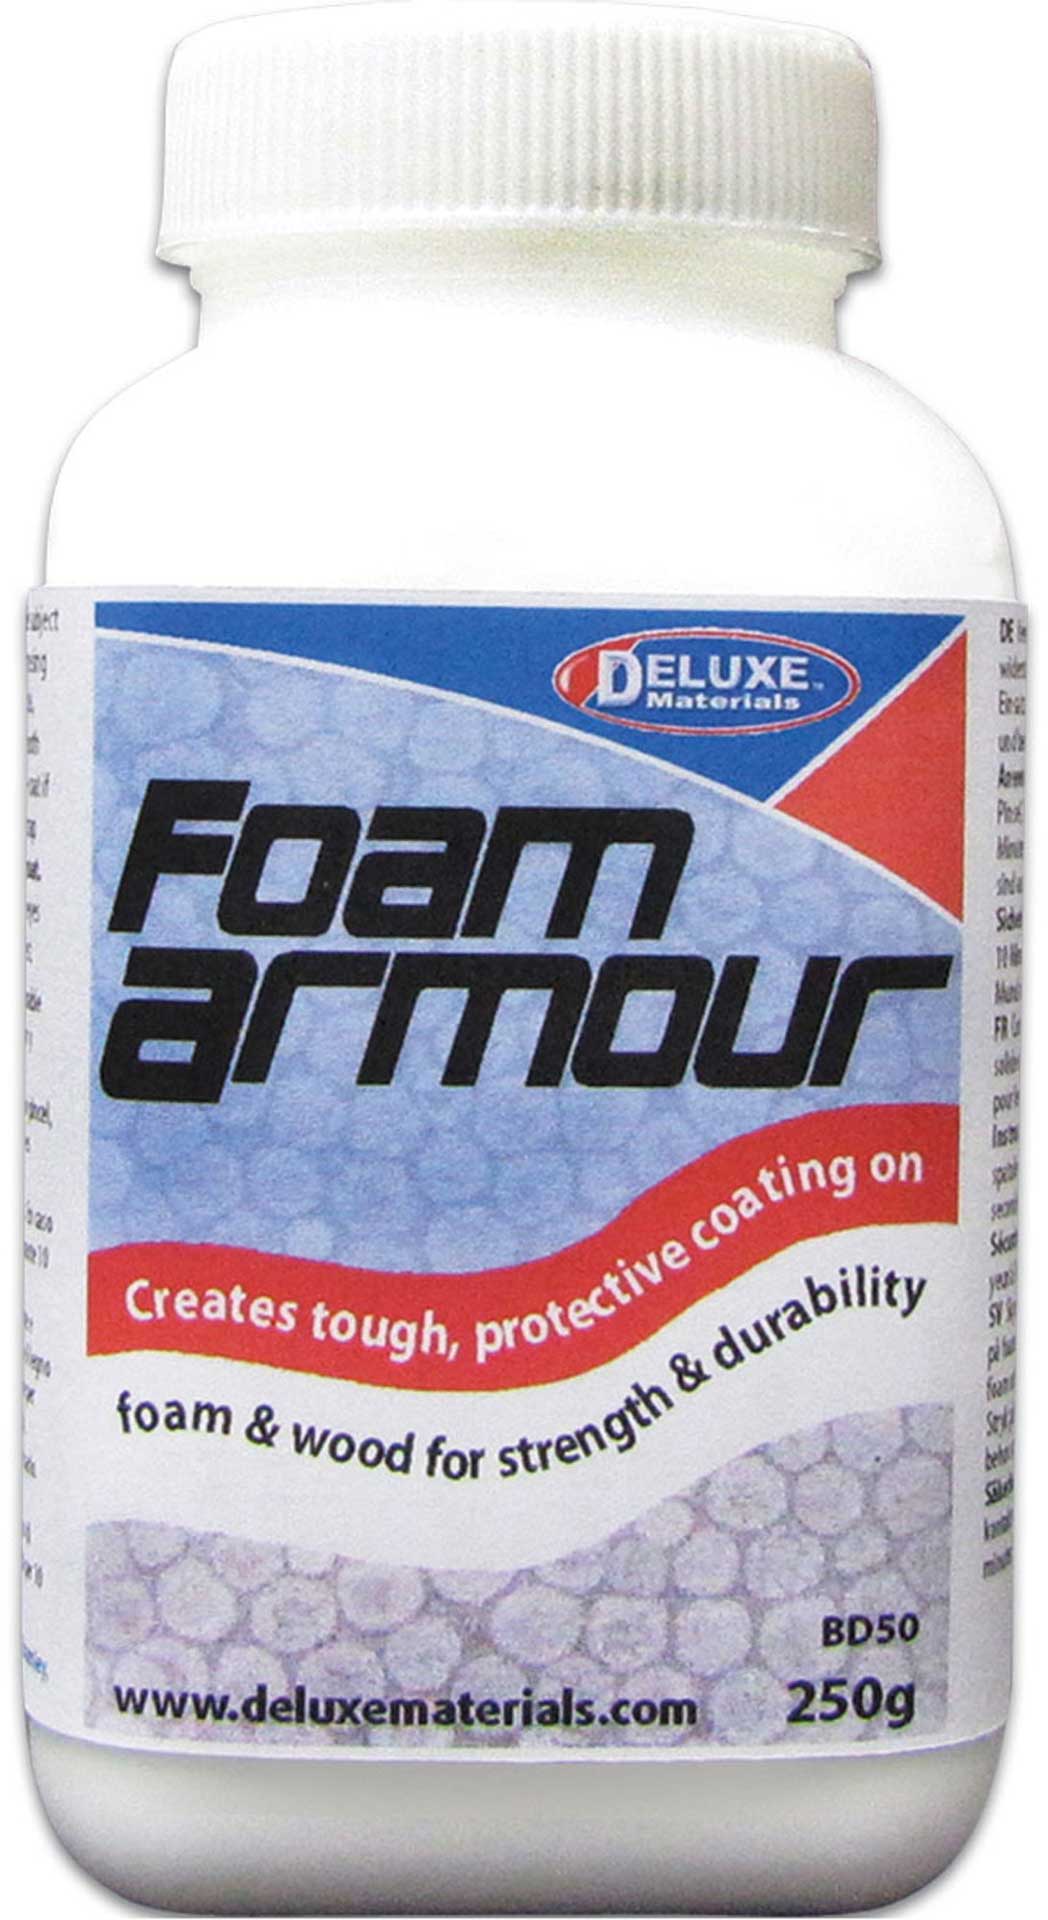 DELUXE FOAM ARMOUR SURFACE COATING 250G FOR  VARIOUS. FOAM MATERIALS, WOOD...